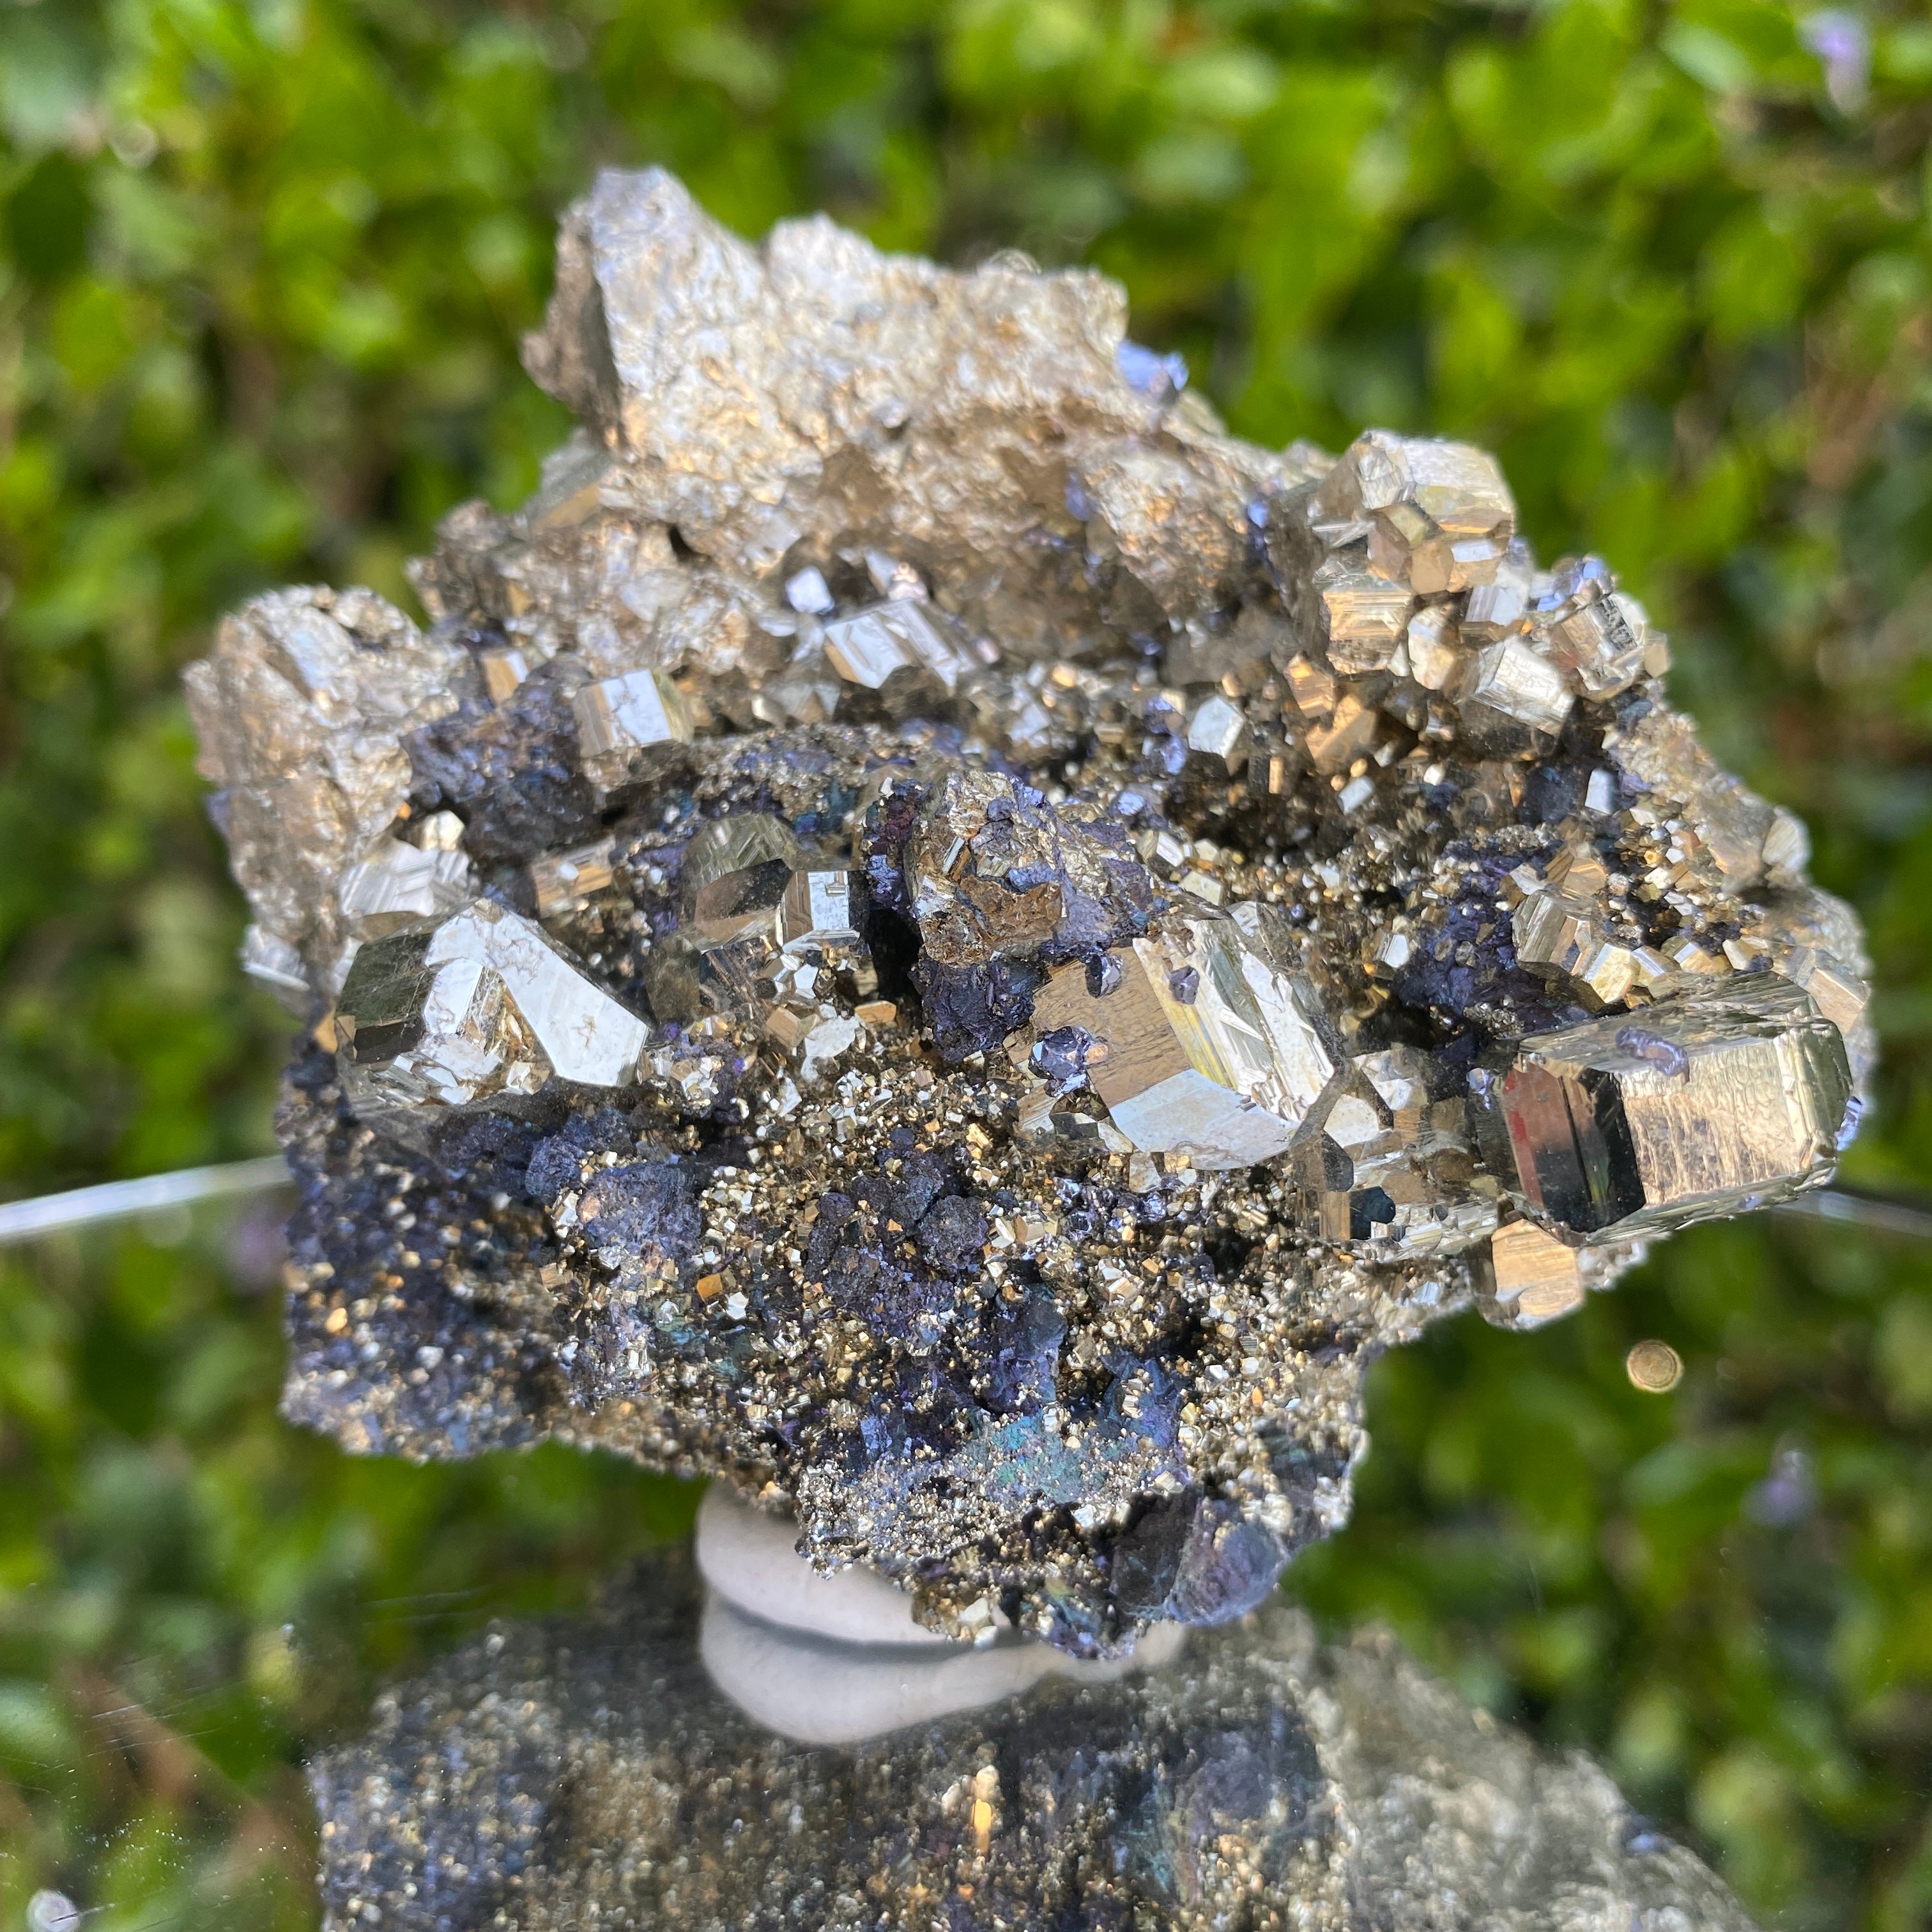 450g 8x8x6cm Silver Galena and Gold Pyrite from Peru